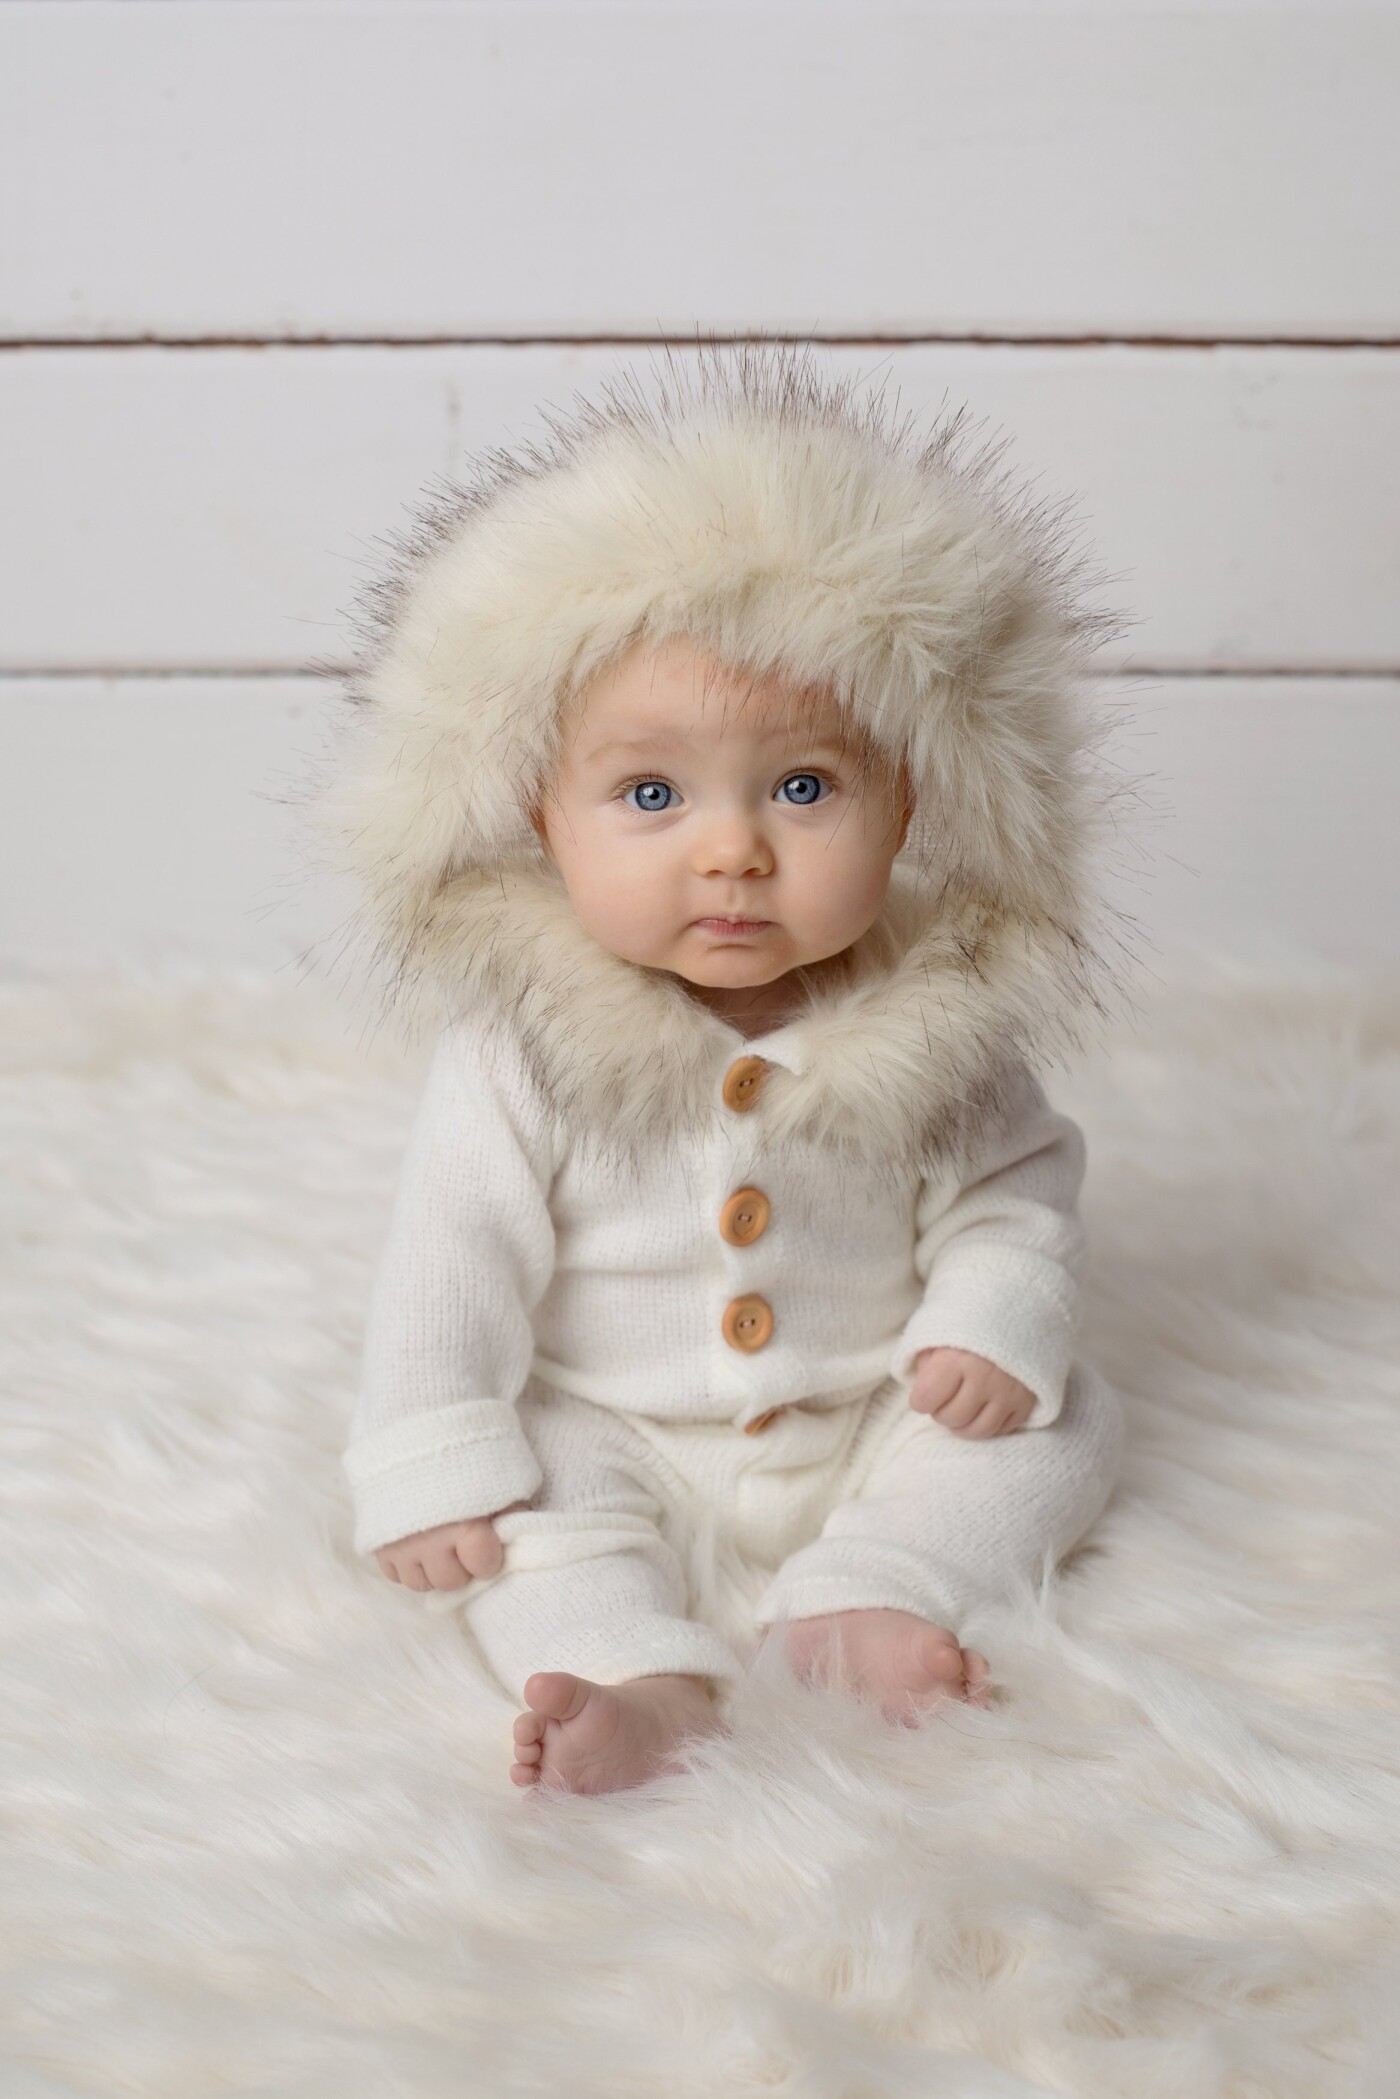 Taken just days before a big blizzard in Winnipeg, this doll like seven month old baby girl looked adorable in all things white and wintery.   